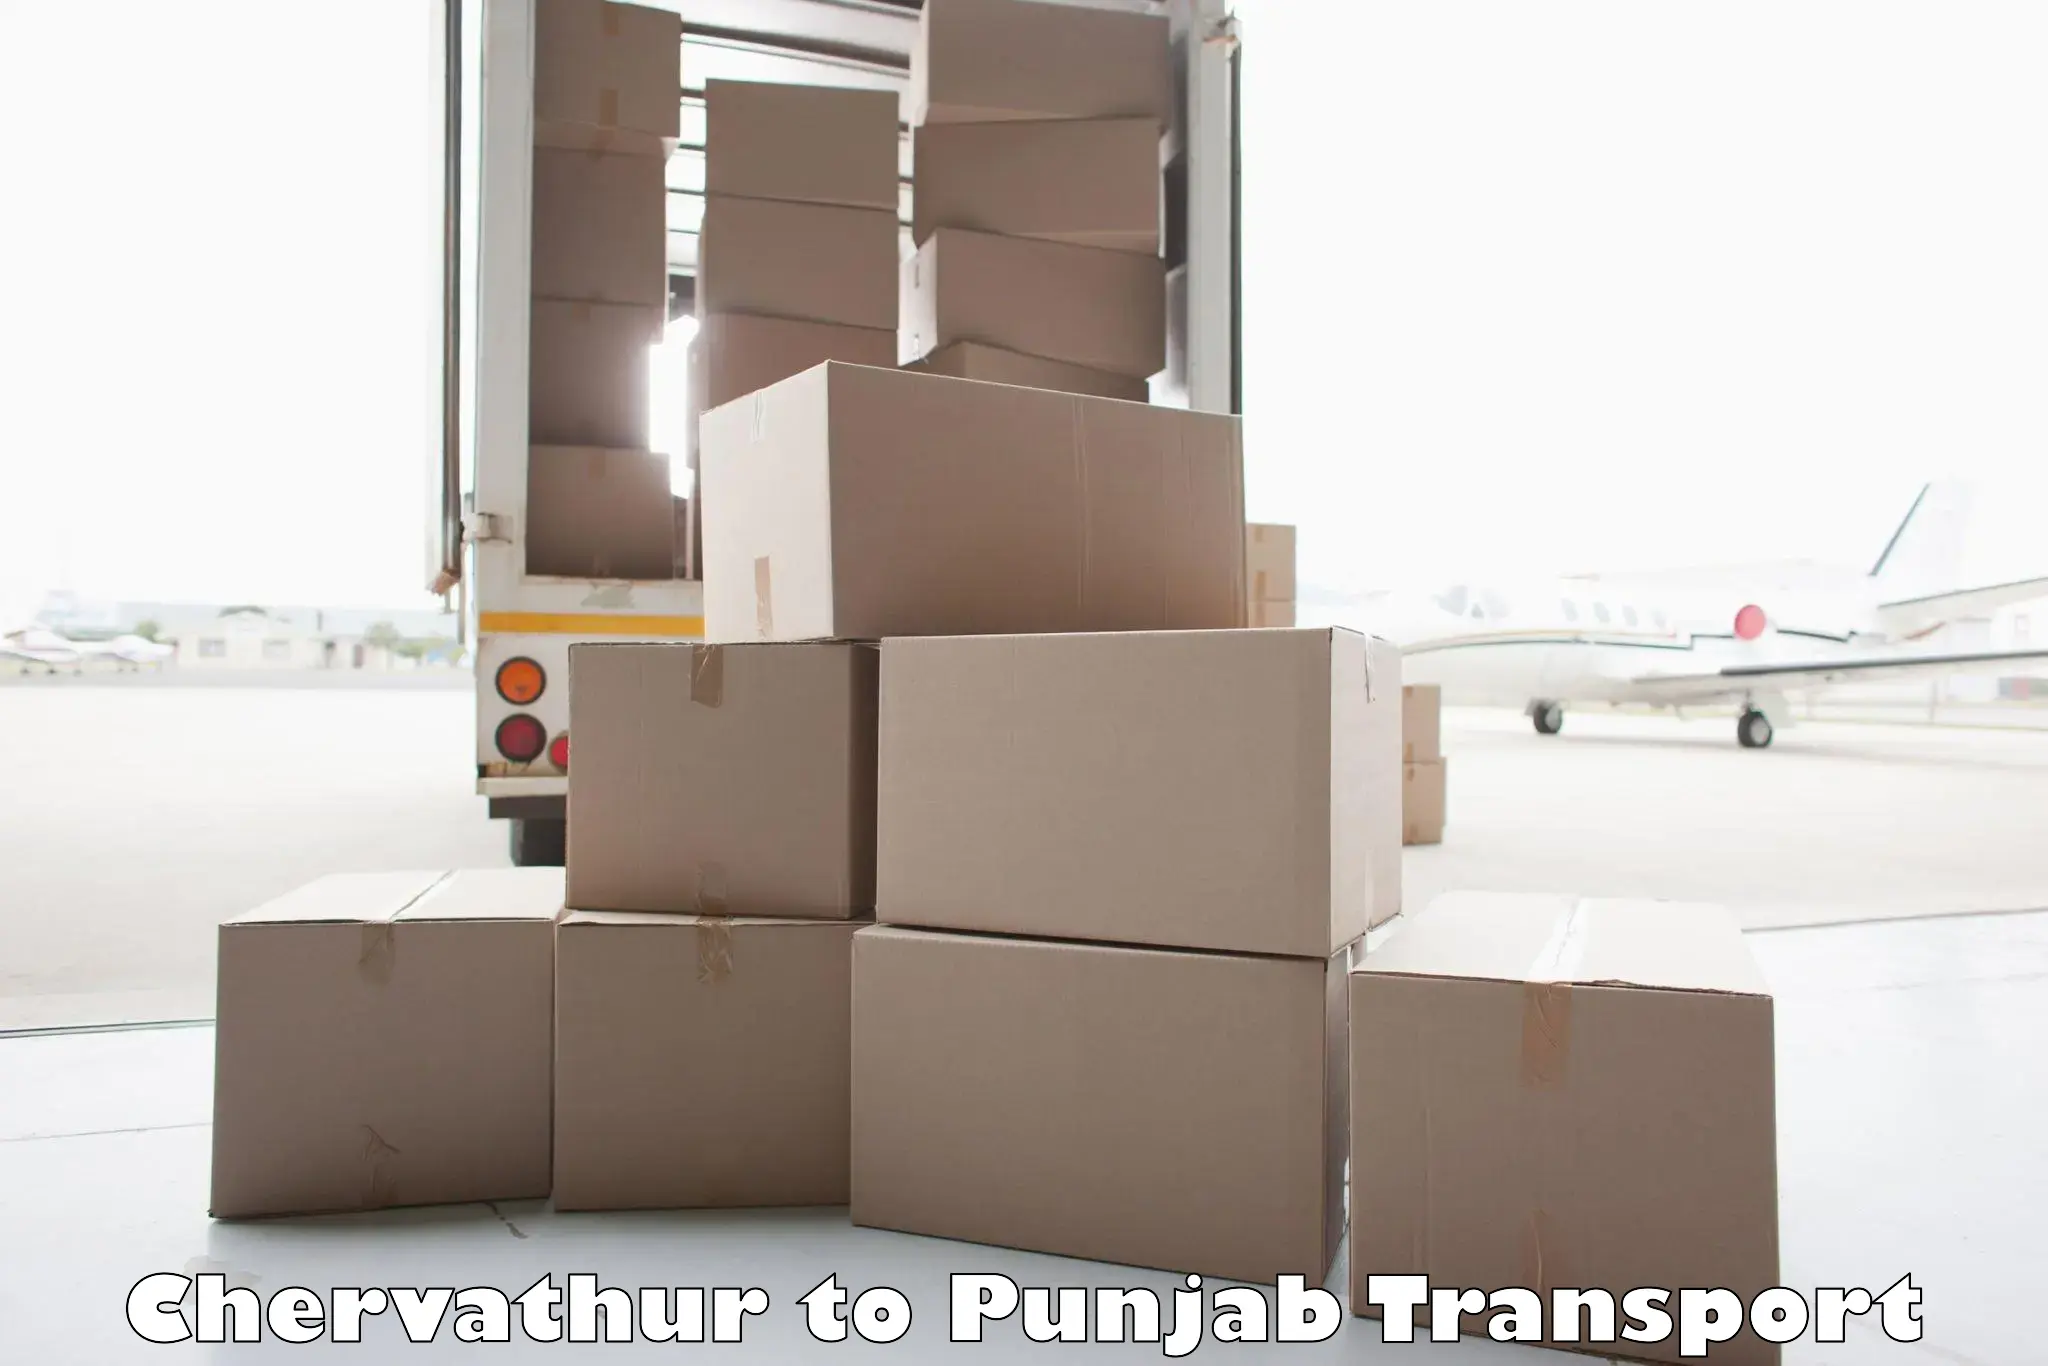 Truck transport companies in India Chervathur to Dera Bassi